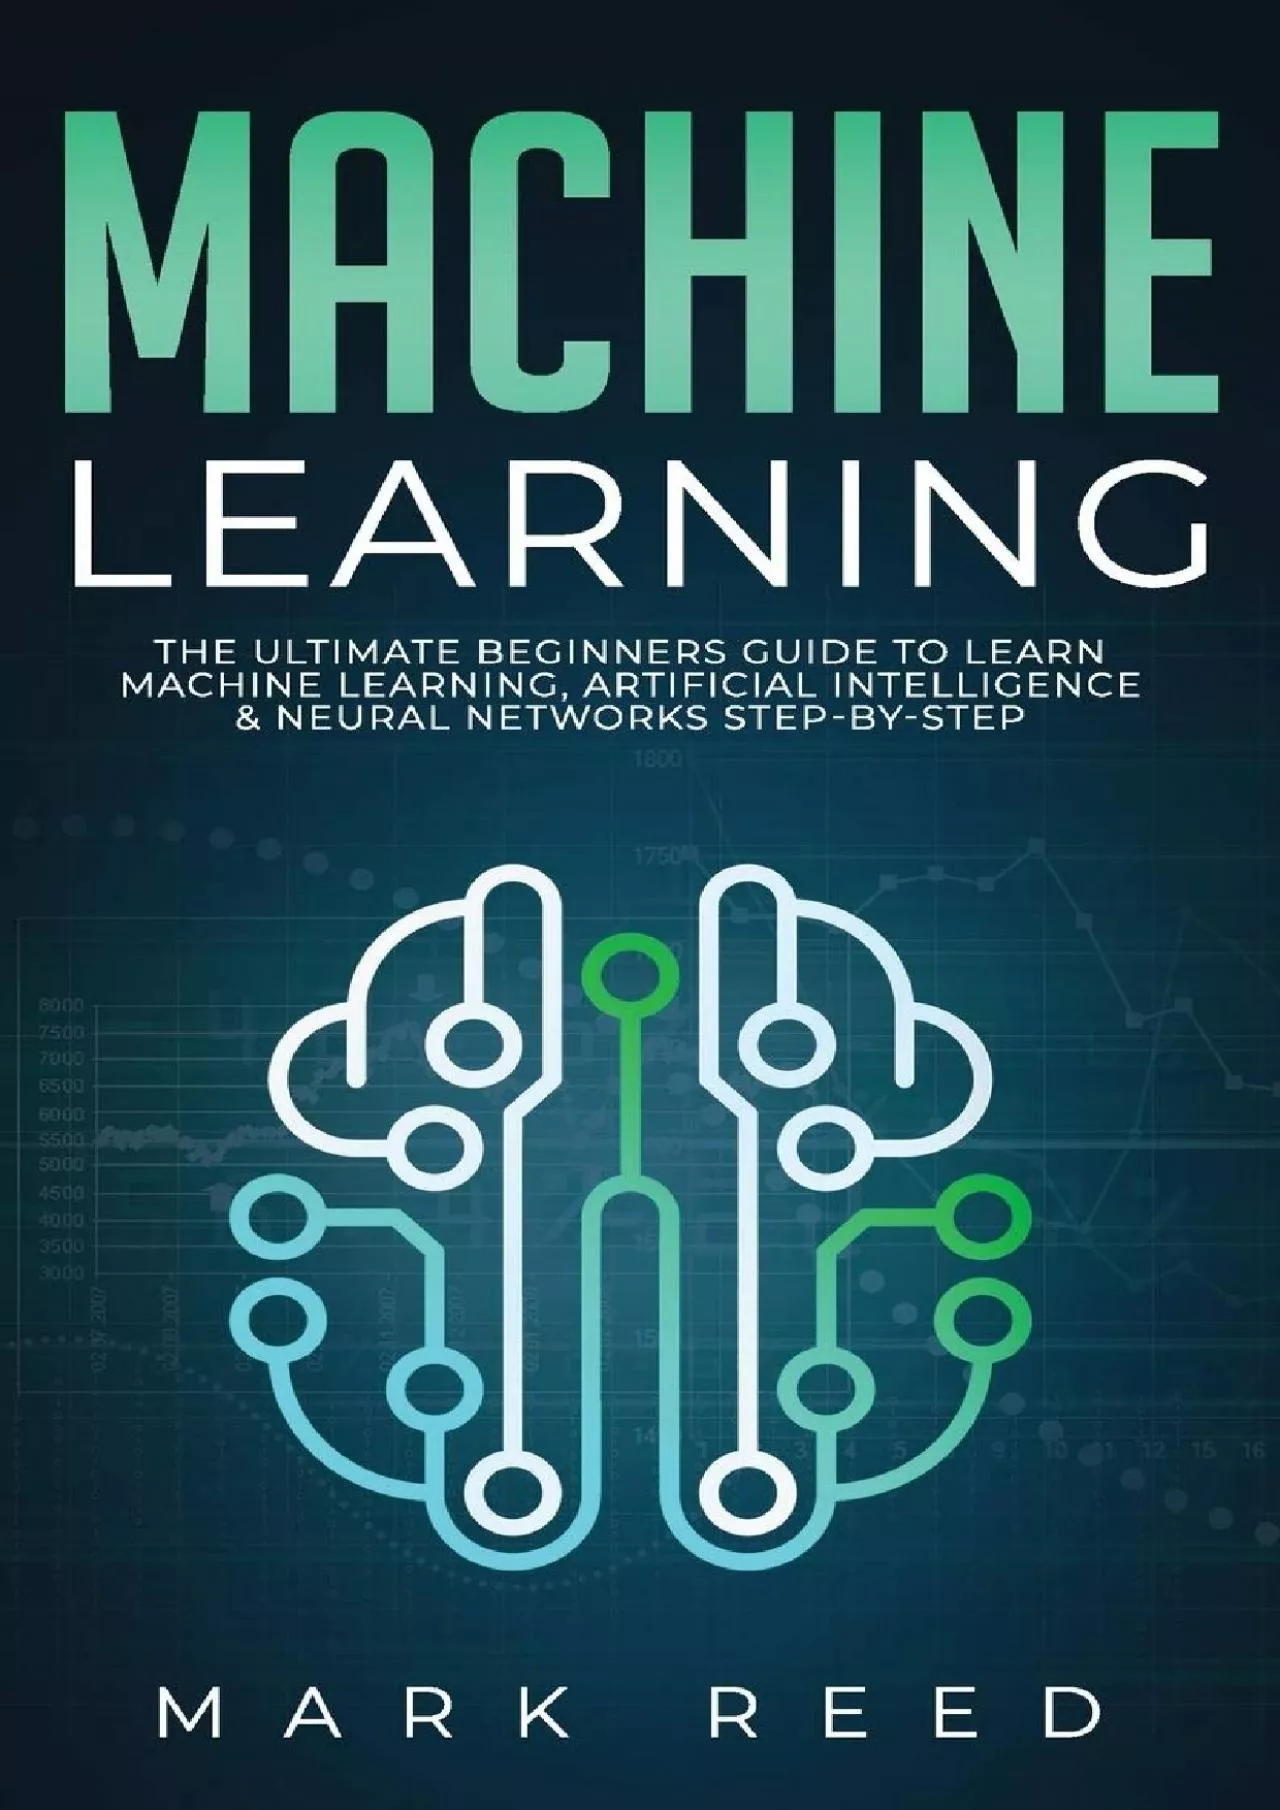 [READING BOOK]-Machine Learning The Ultimate Beginners Guide to Learn Machine Learning,